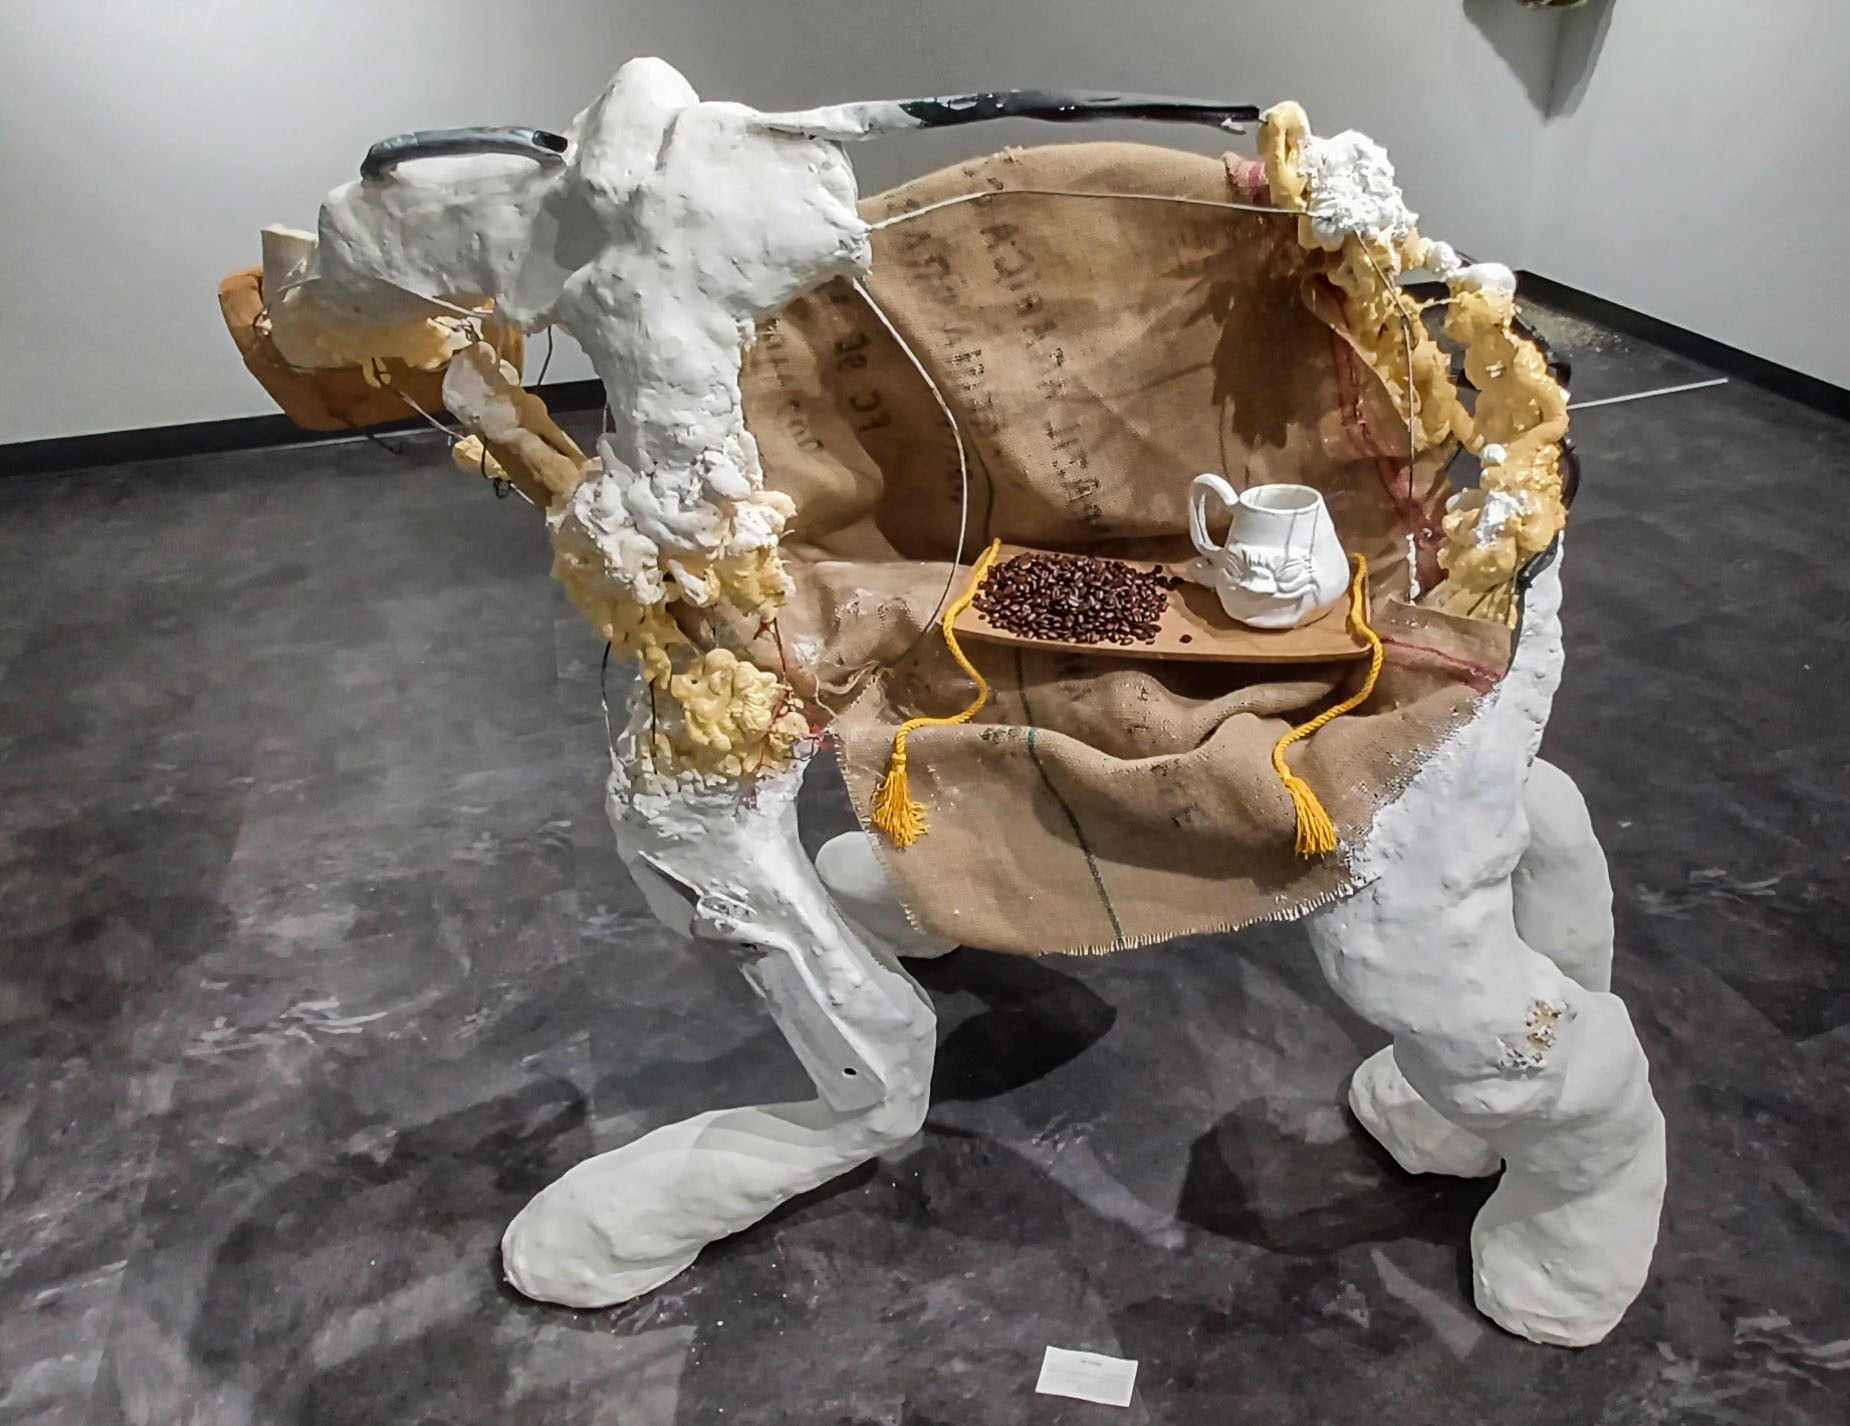 Four legged sculpture carrying coffee in stomach